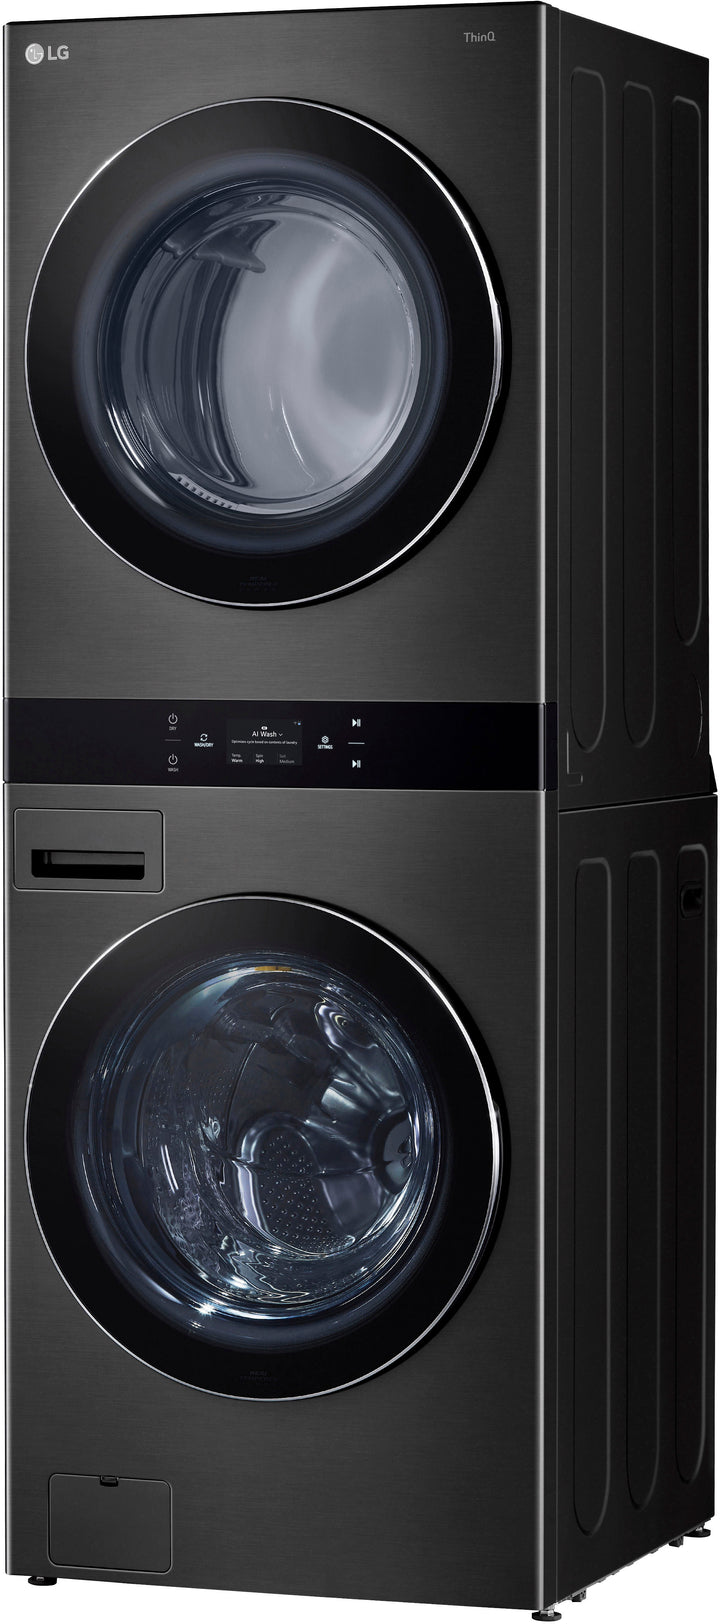 LG - 5.0 Cu. Ft. HE Smart Front Load Washer and 7.4 Cu. Ft. Electric Dryer WashTower with Steam and Center Control - Black Steel_2